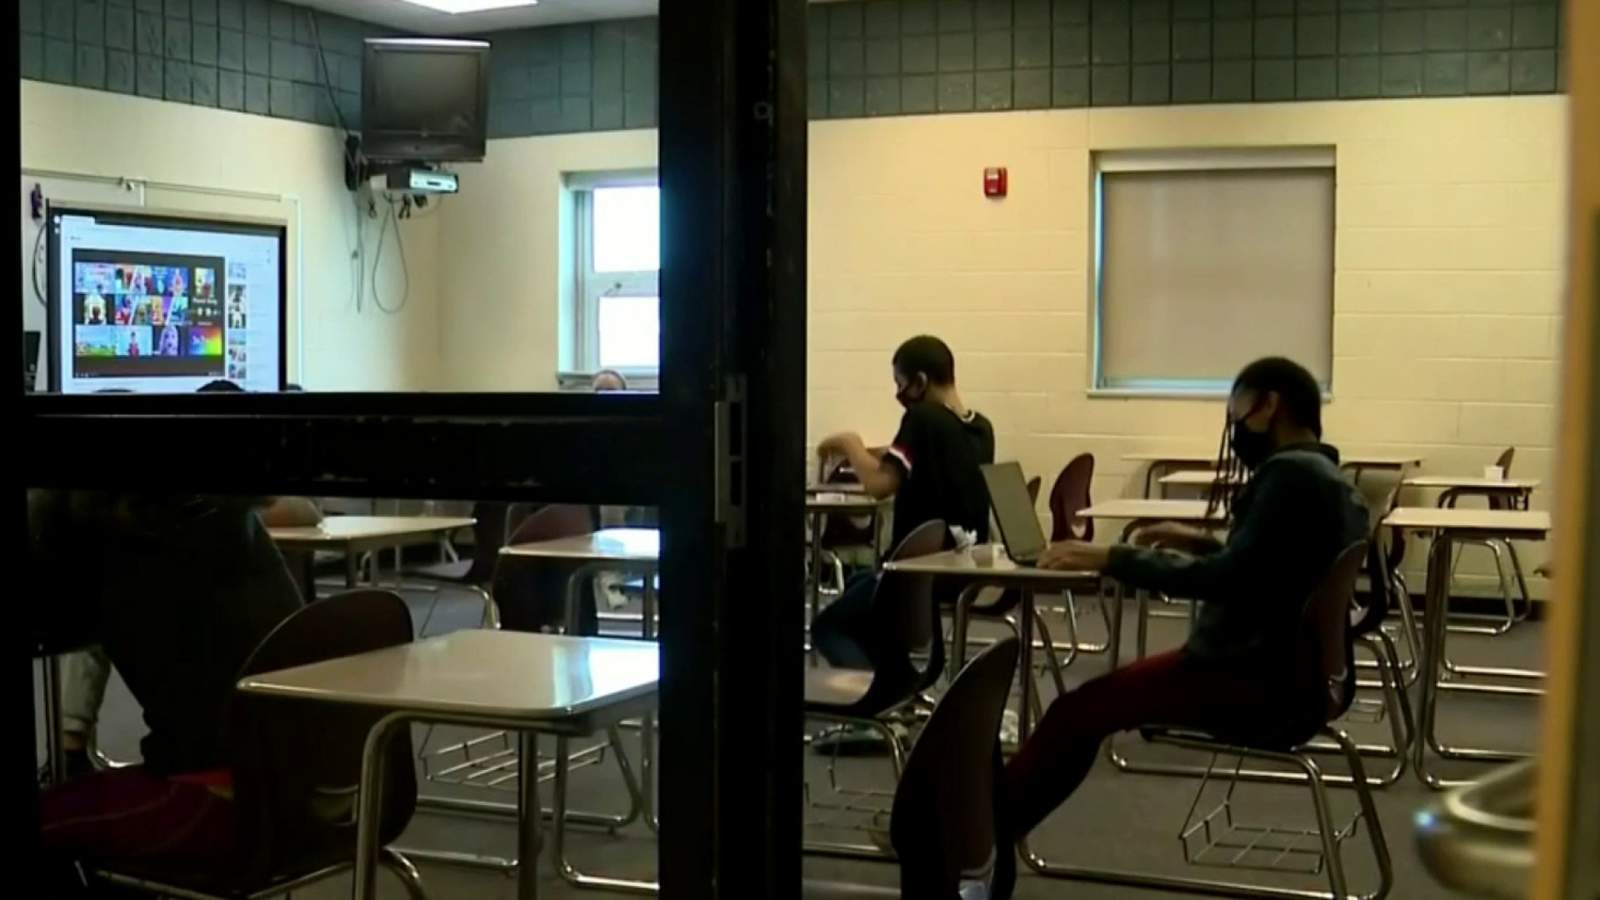 Questions linger ahead of start of school year in Michigan